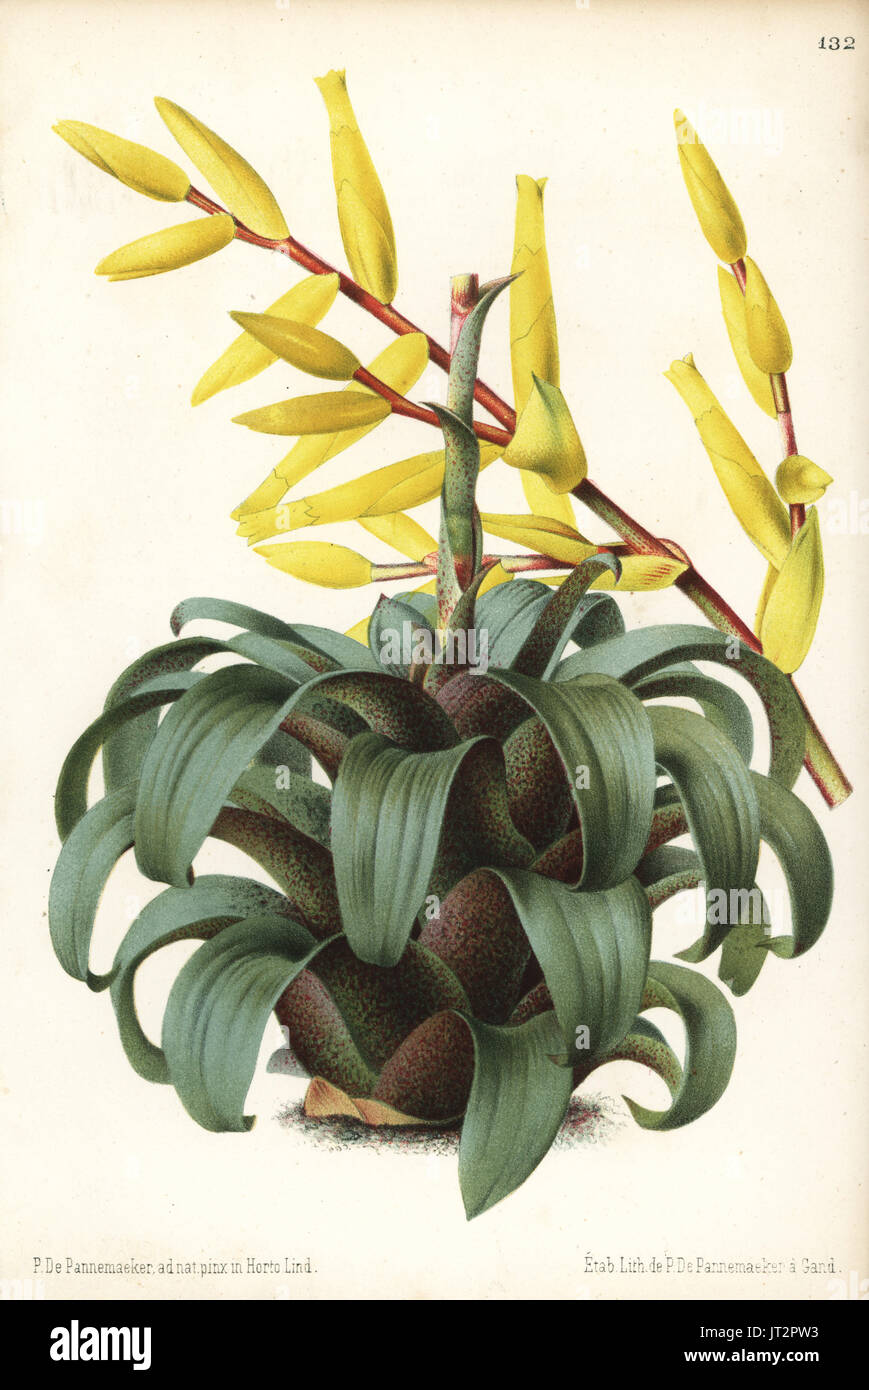 Vriesea saundersii (Encholirion saundersii). Drawn and chromolithographed by P. de Pannemaeker from Jean Linden's l'Illustration Horticole, Brussels, 1873. Stock Photo